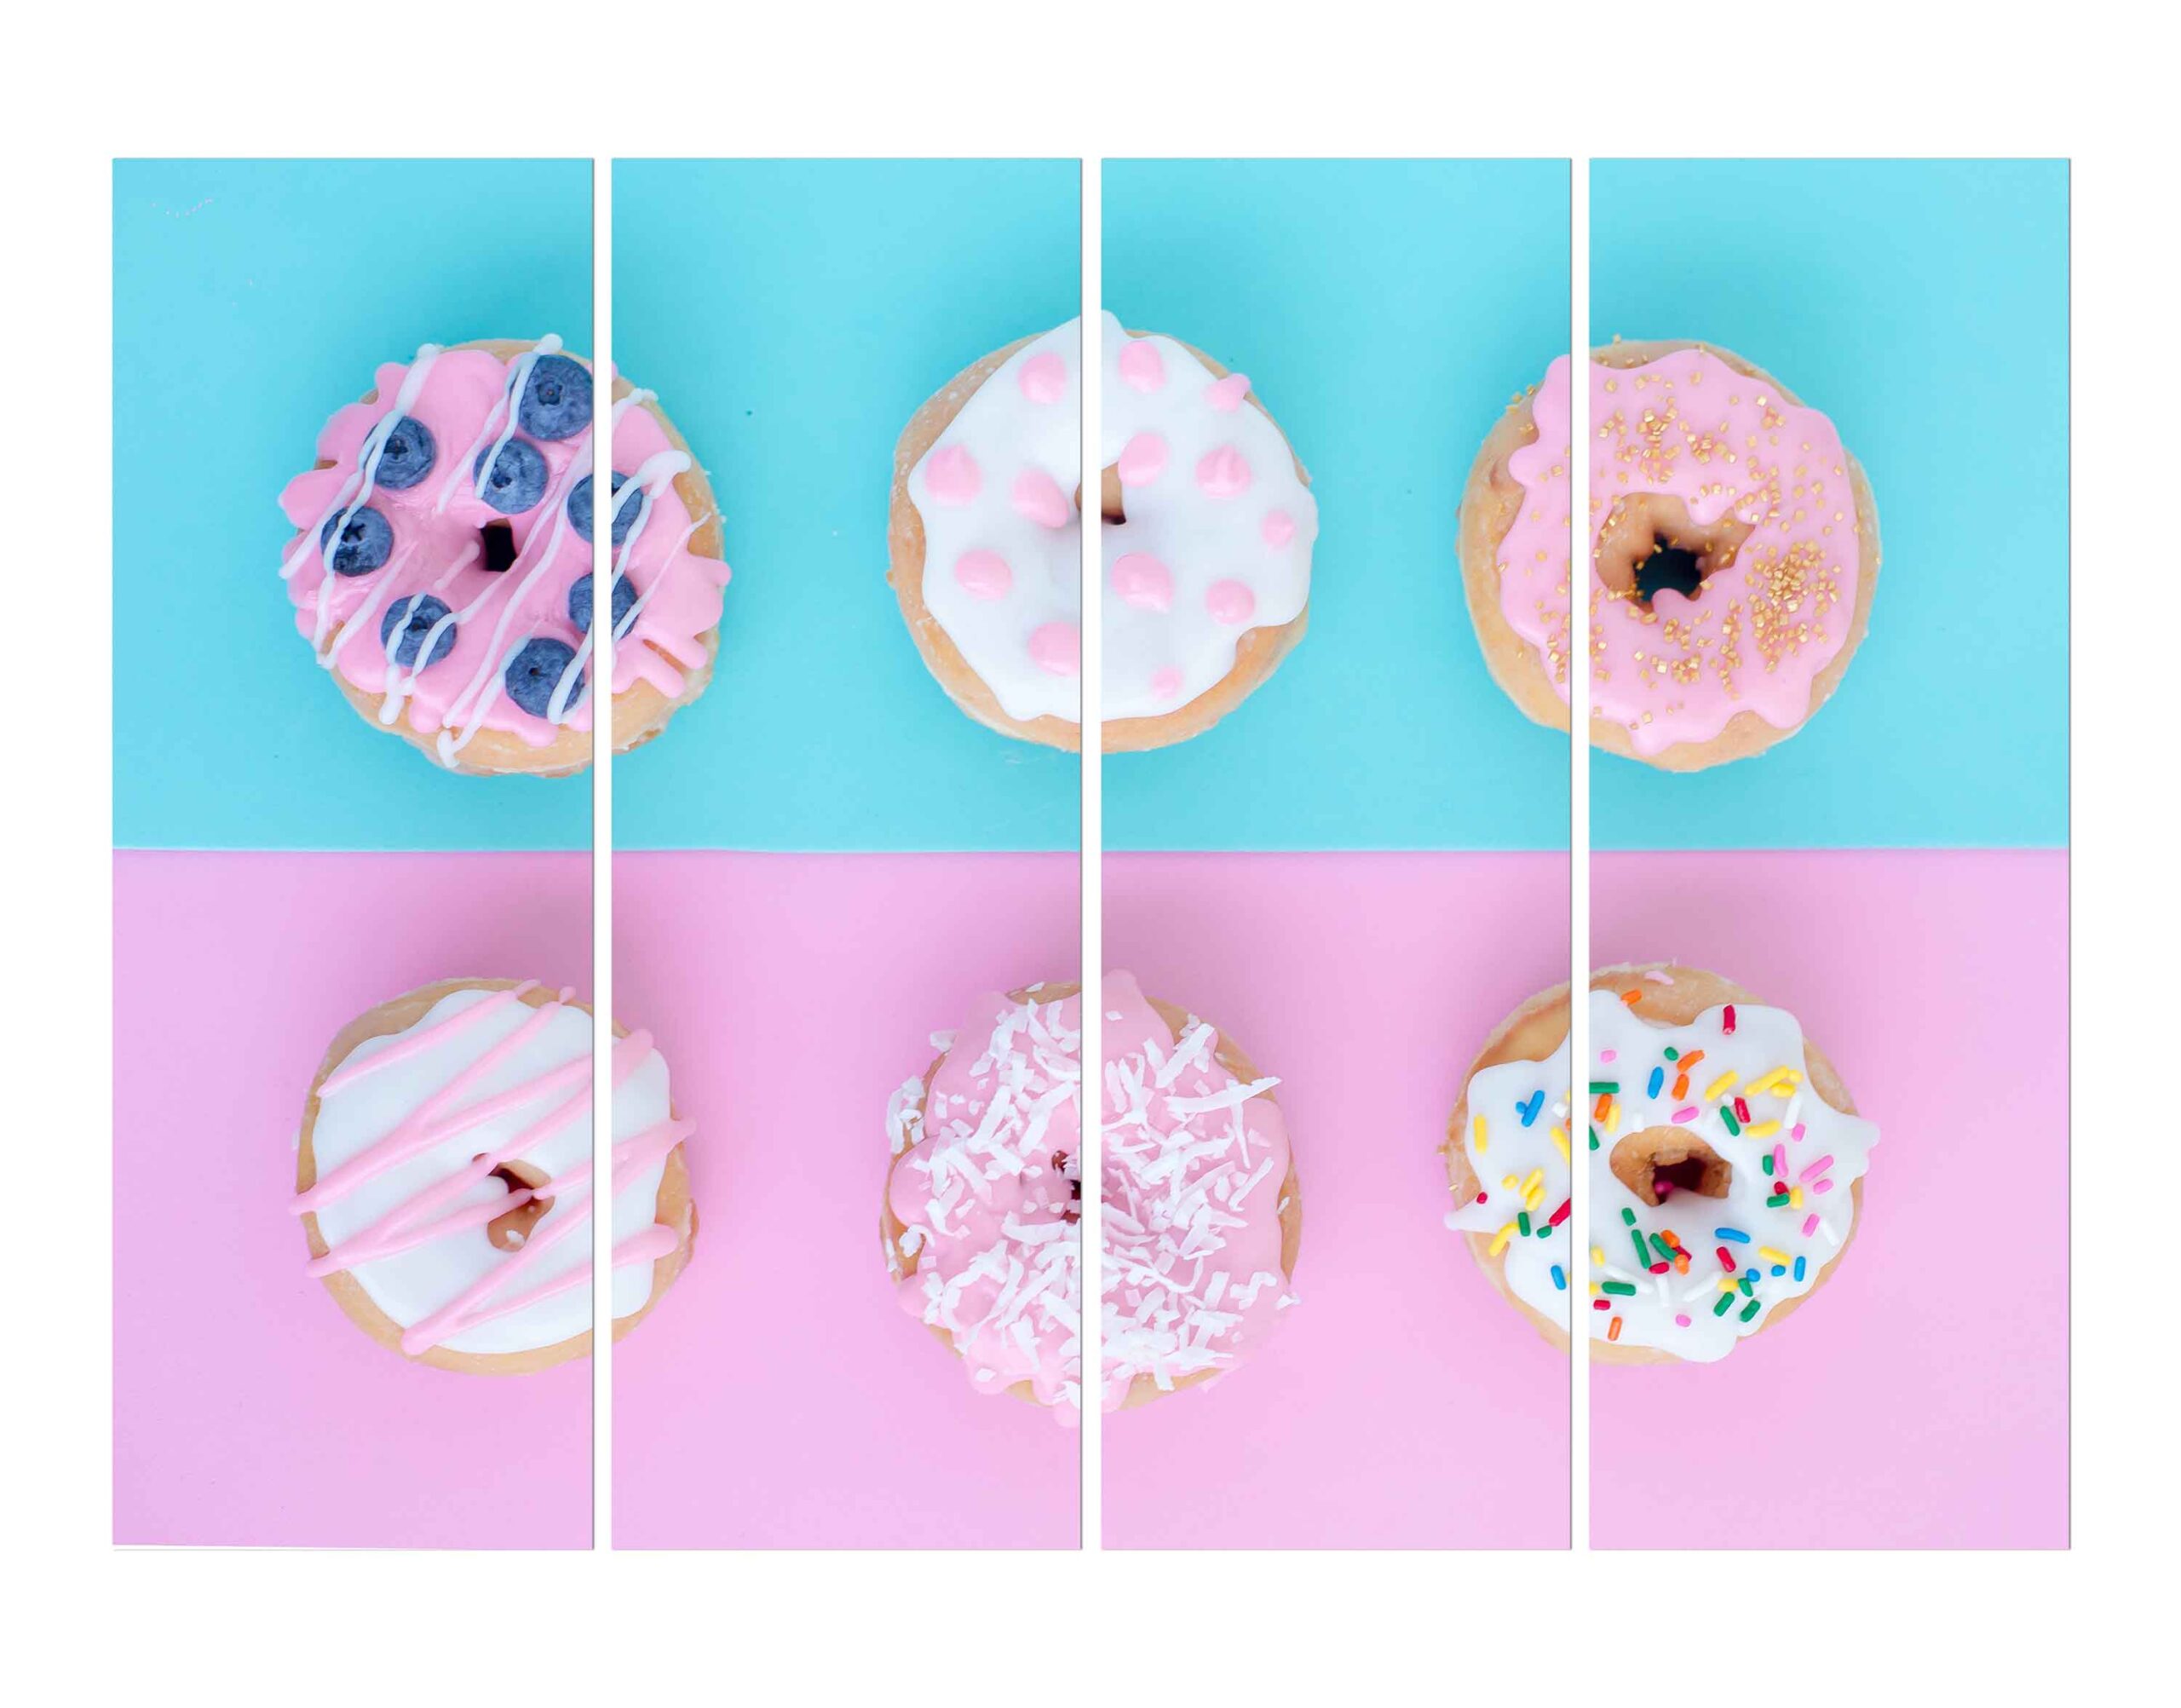 Six Donuts with Pink Blue & White Creamy Spreaded Wall Art Painting